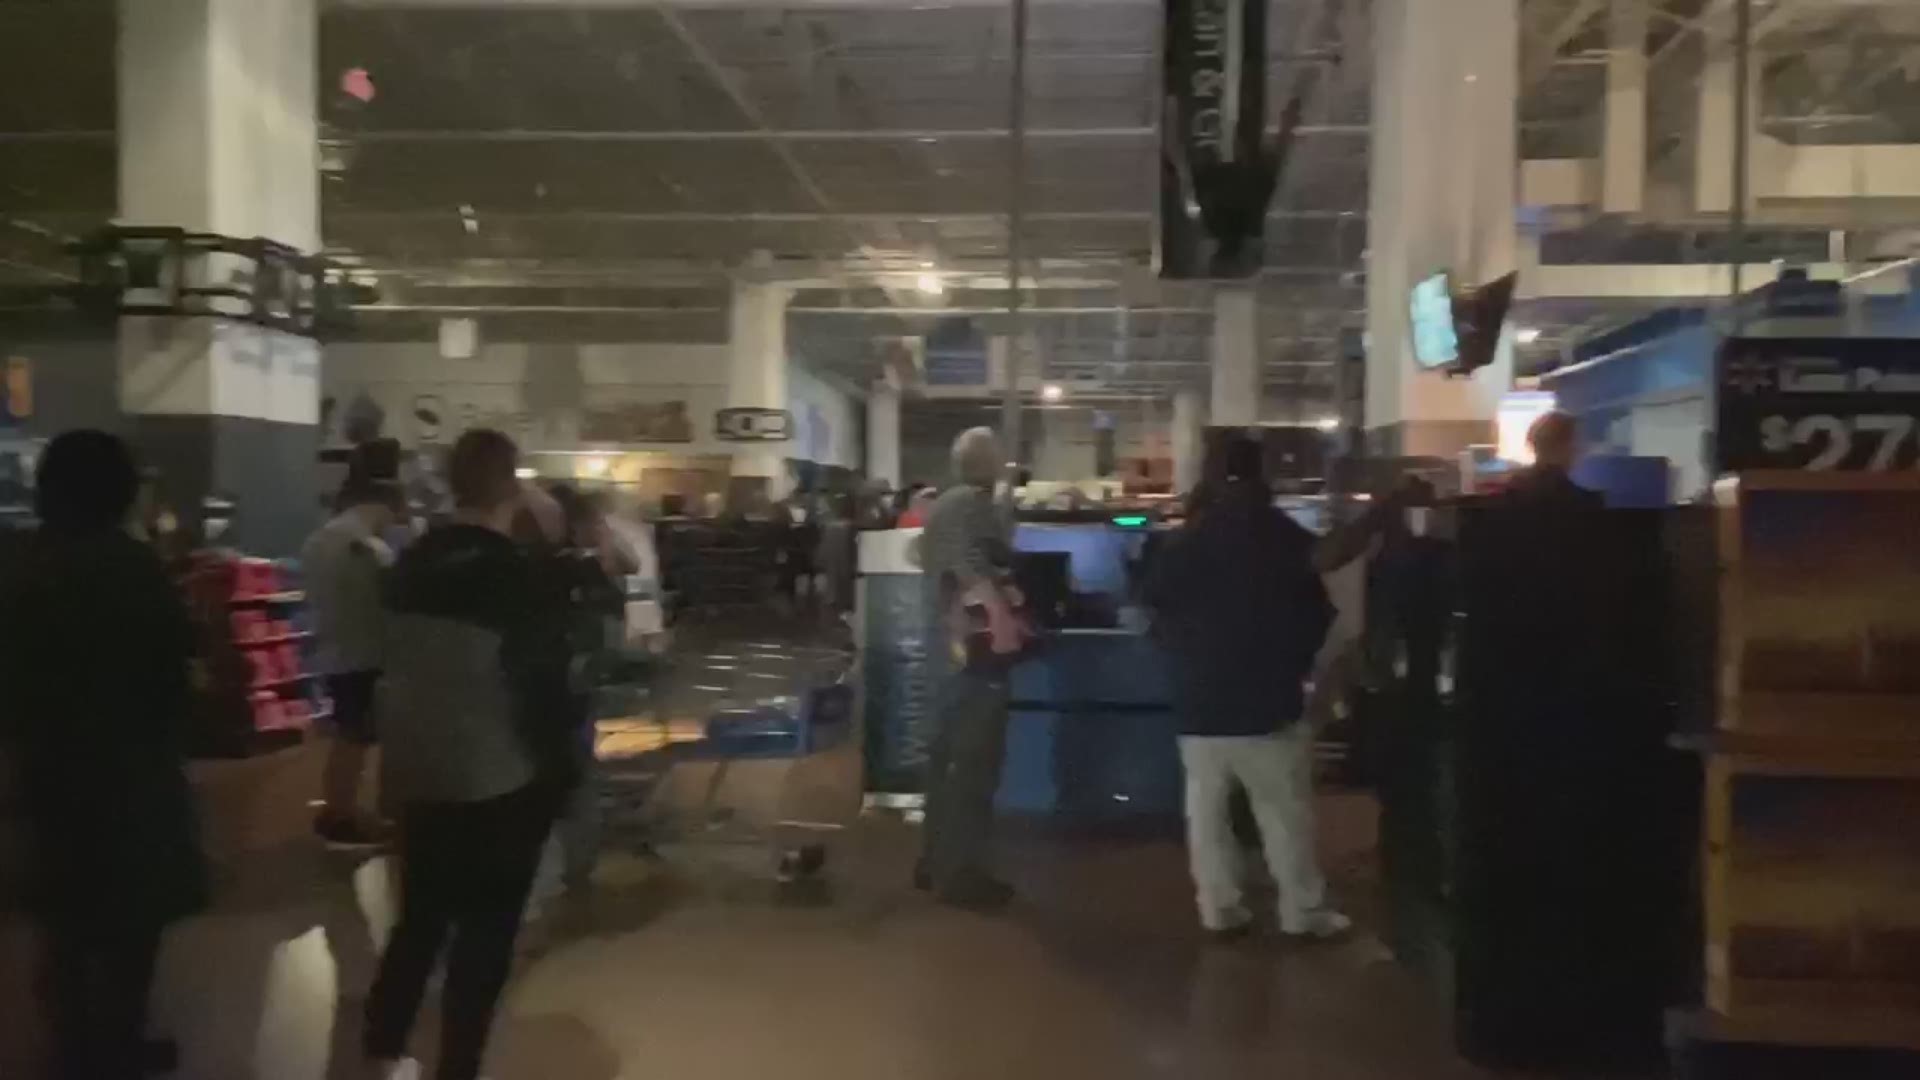 A blackout at the Walmart on Howell Mill has forced the store to evacuate amid major storms.